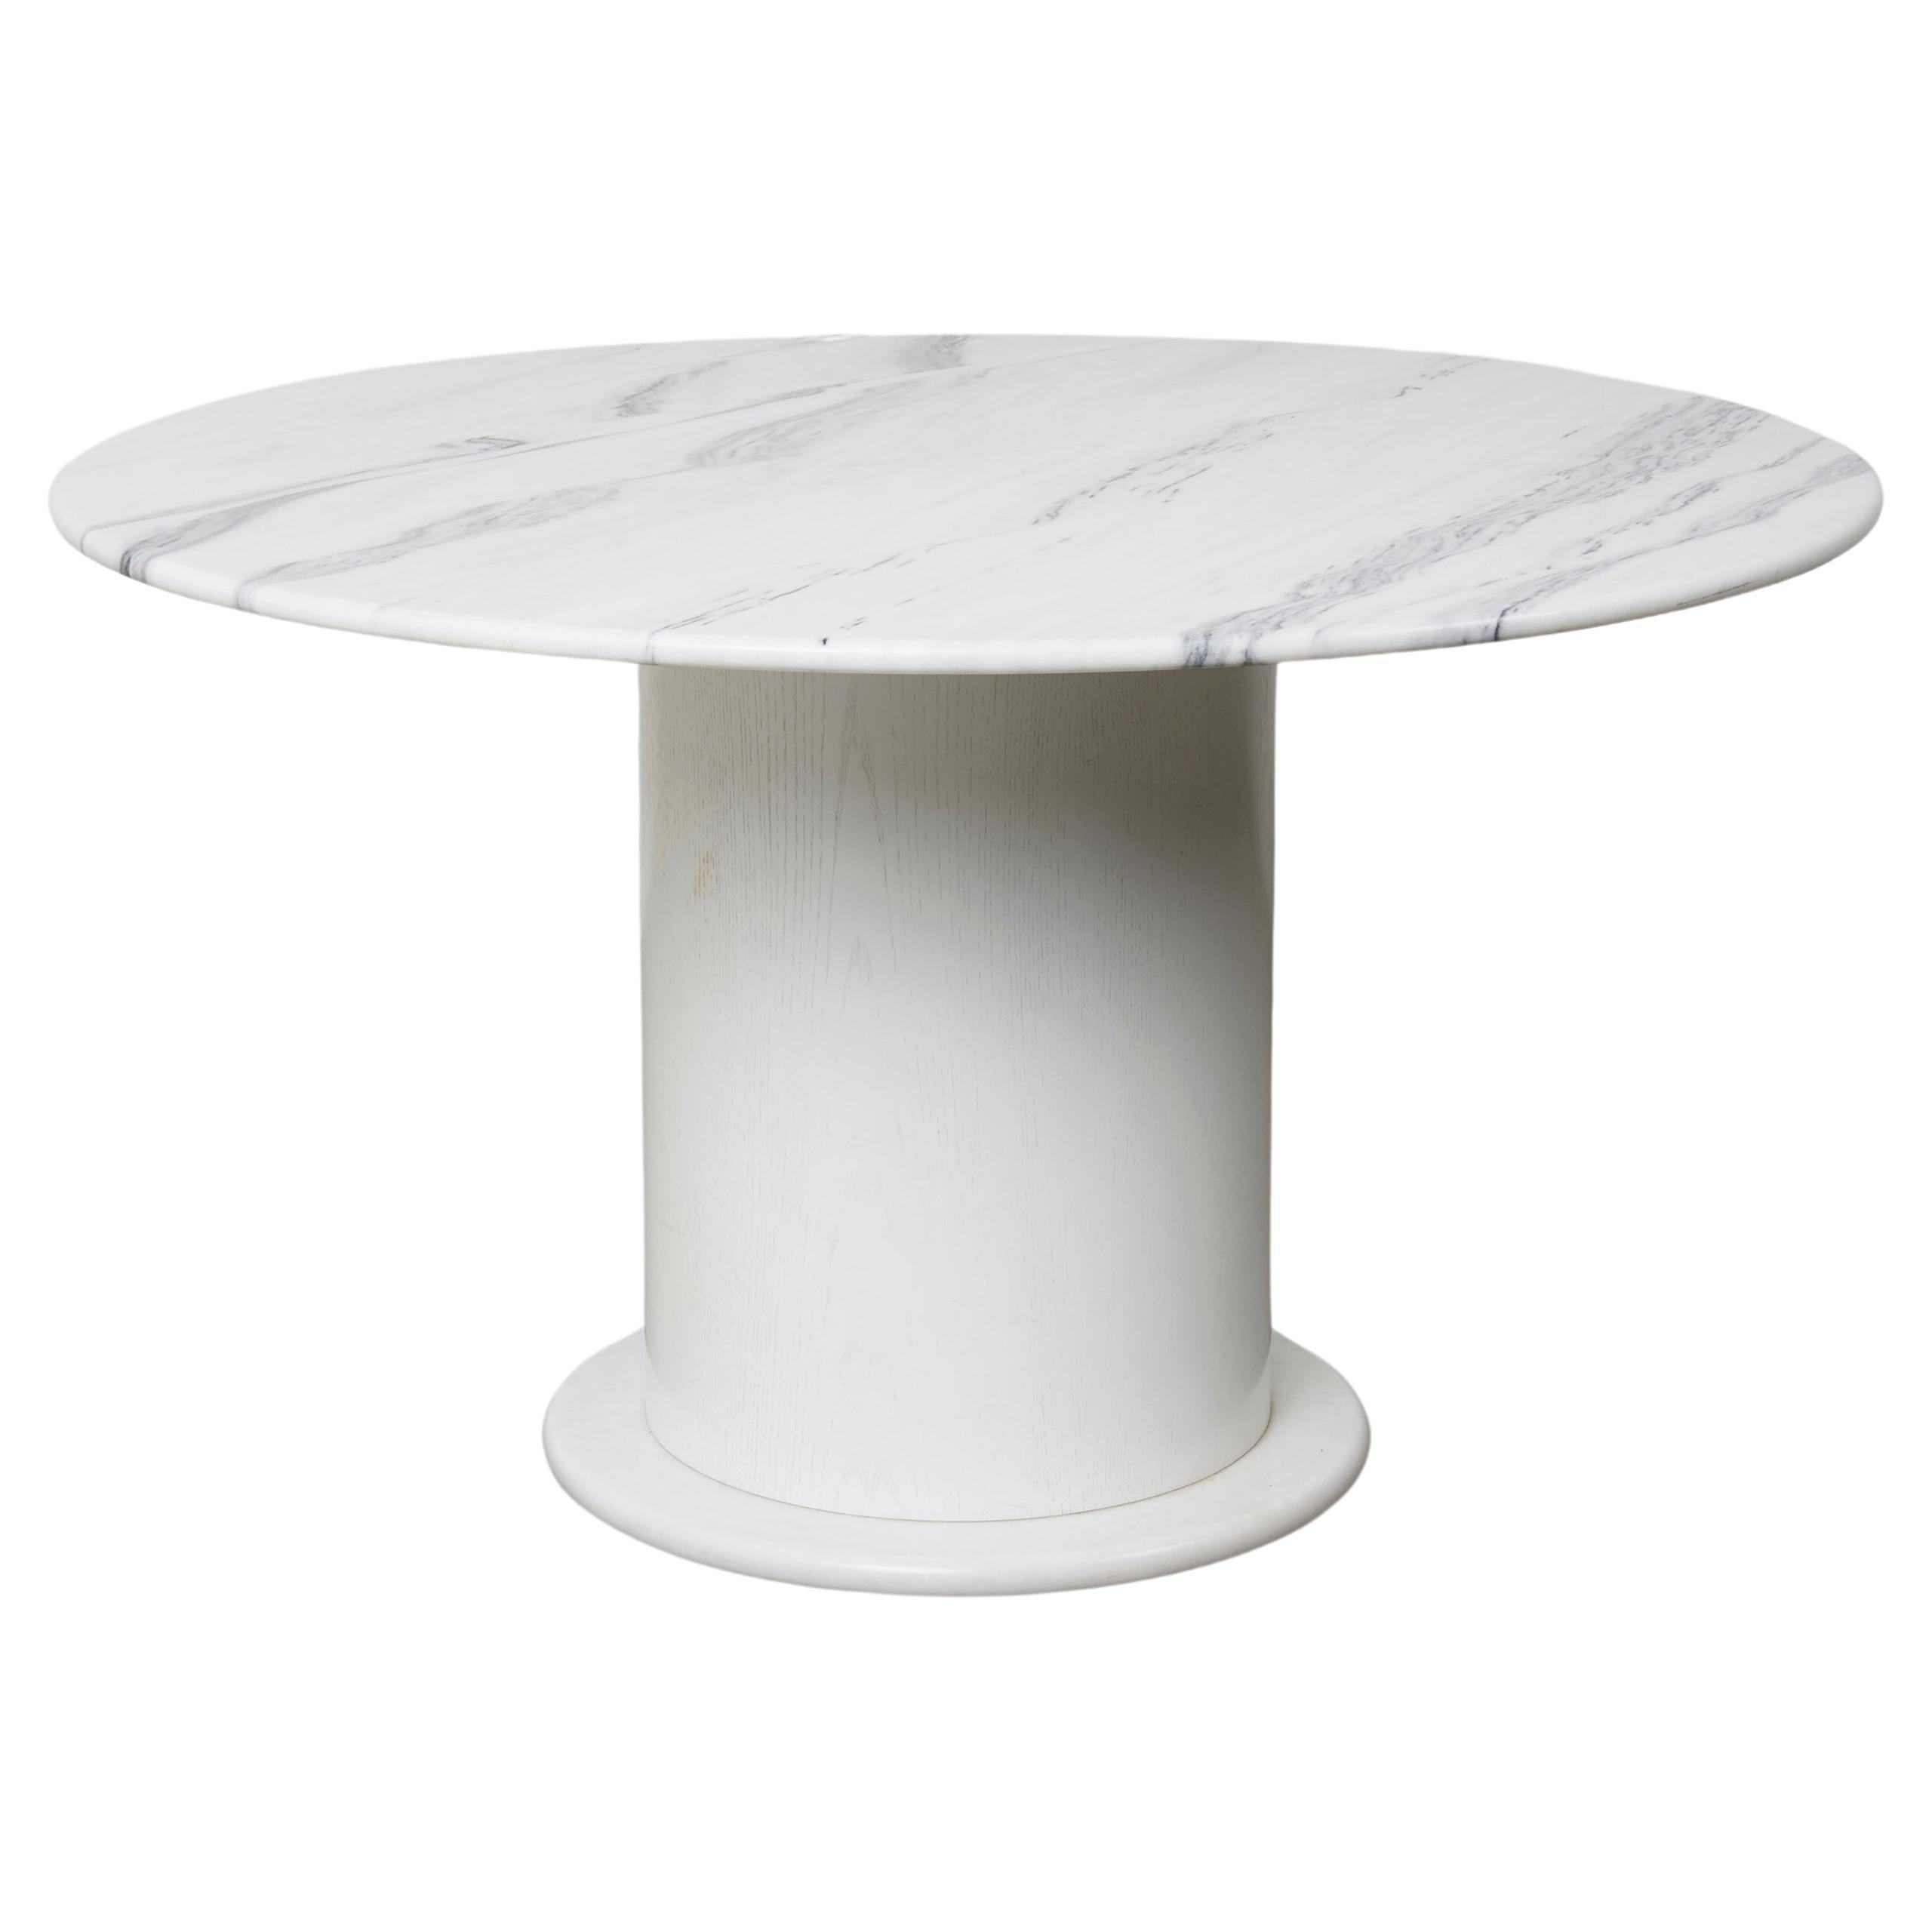 Round Carrara marble dining table, 1970s